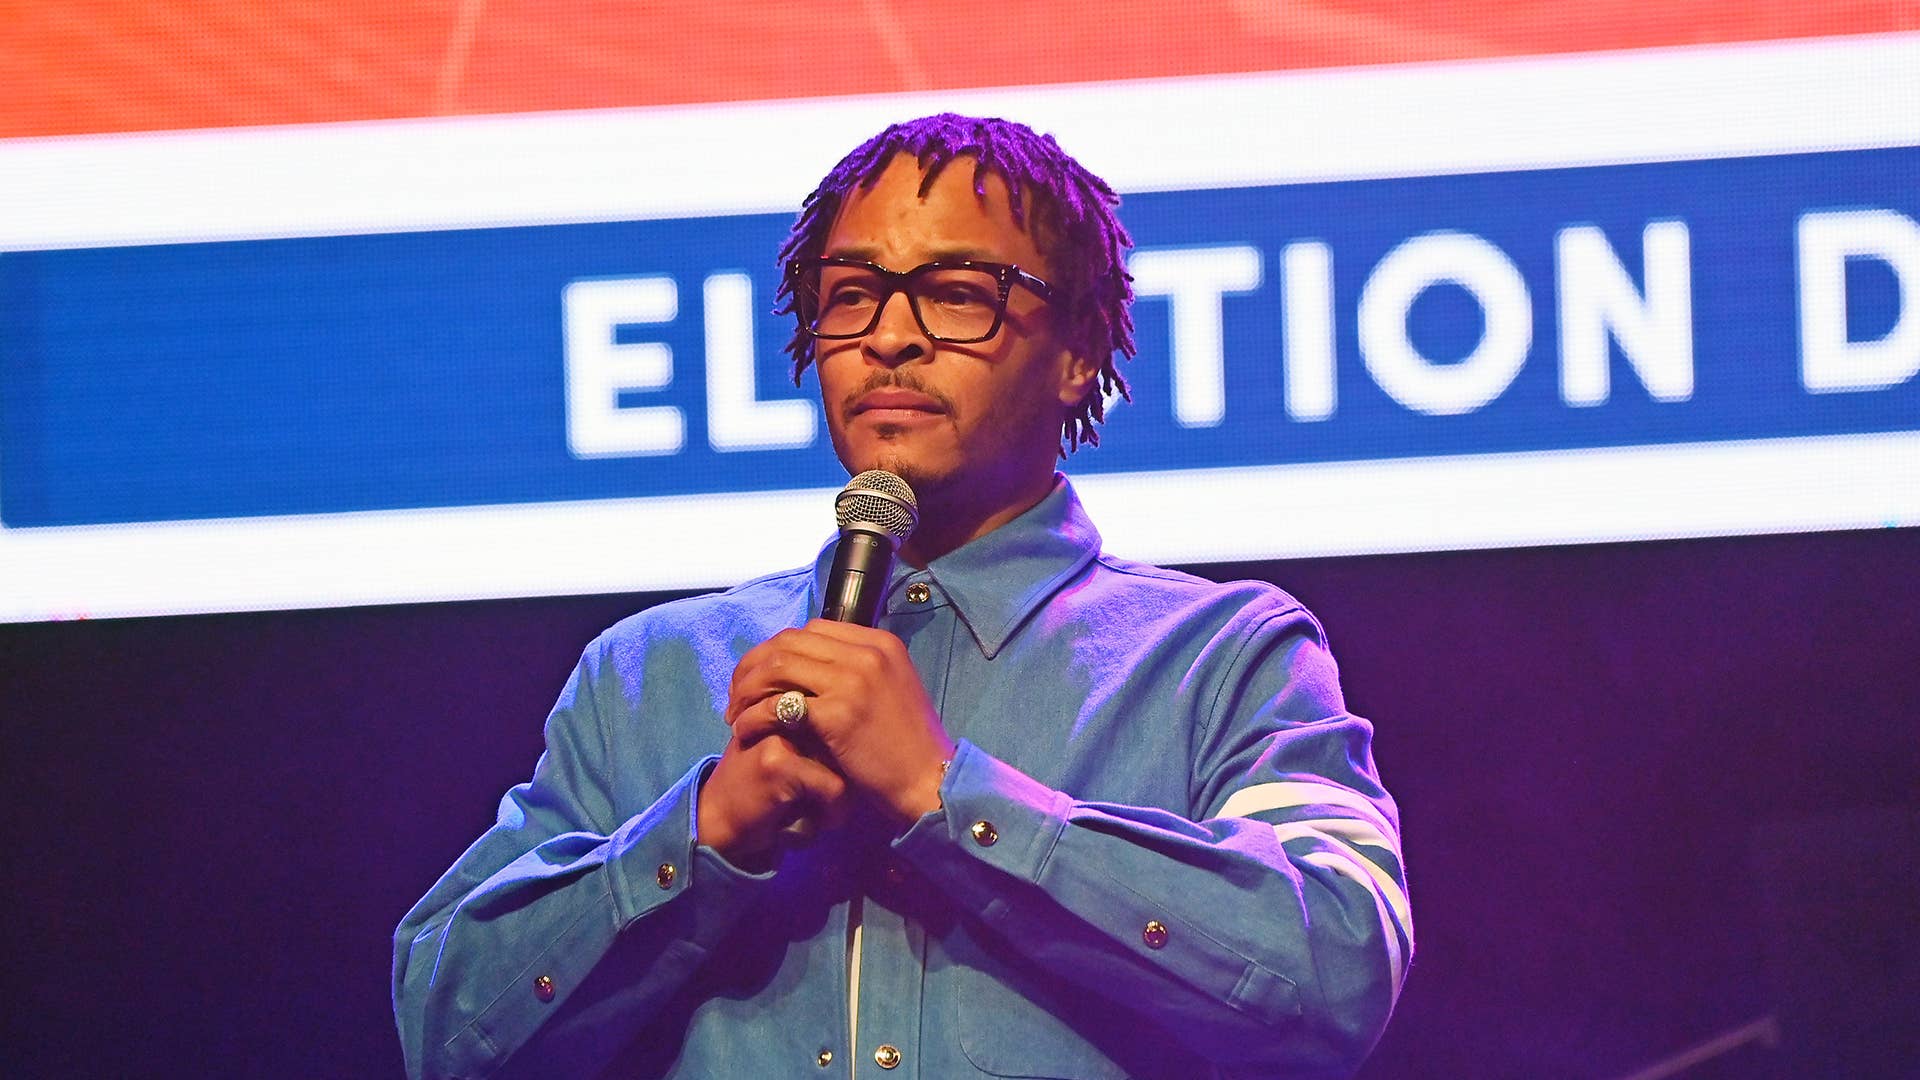 Rapper T.I. speaks onstage during Get Out To Vote Concert & Rally at Center Stage